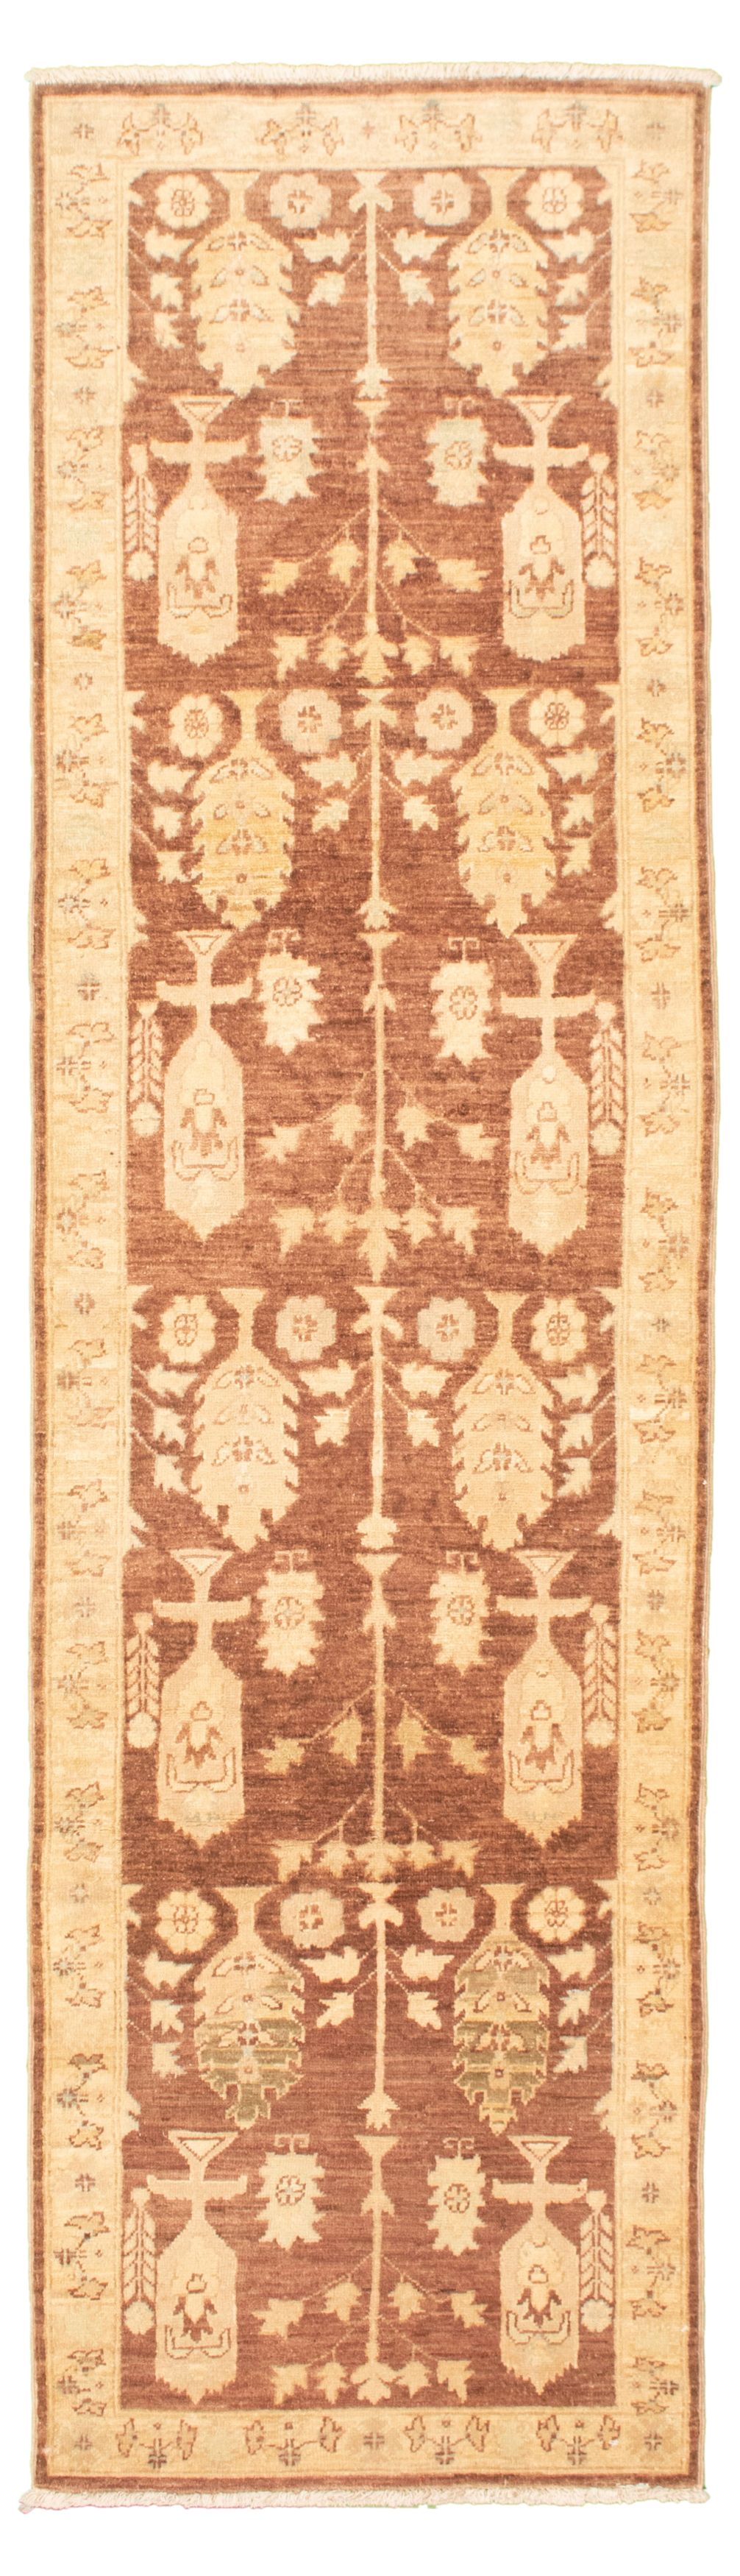 Hand-knotted Chobi Finest Brown Wool Rug 2'7" x 9'10" Size: 2'7" x 9'10"  